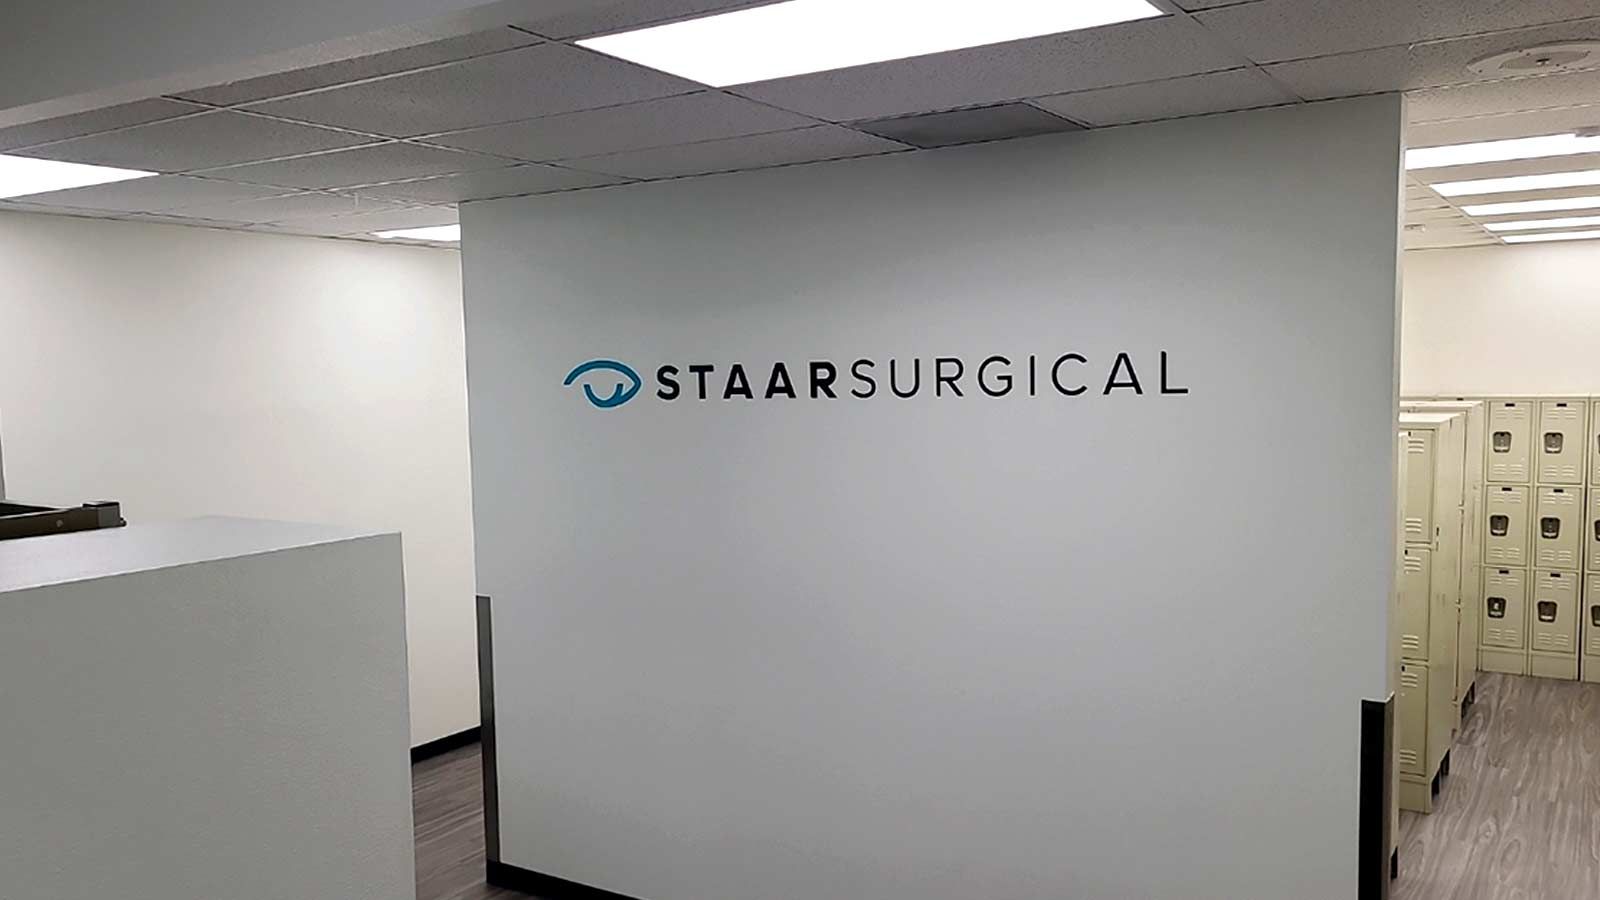 Staar Surgical vinyl lettering applied to the wall